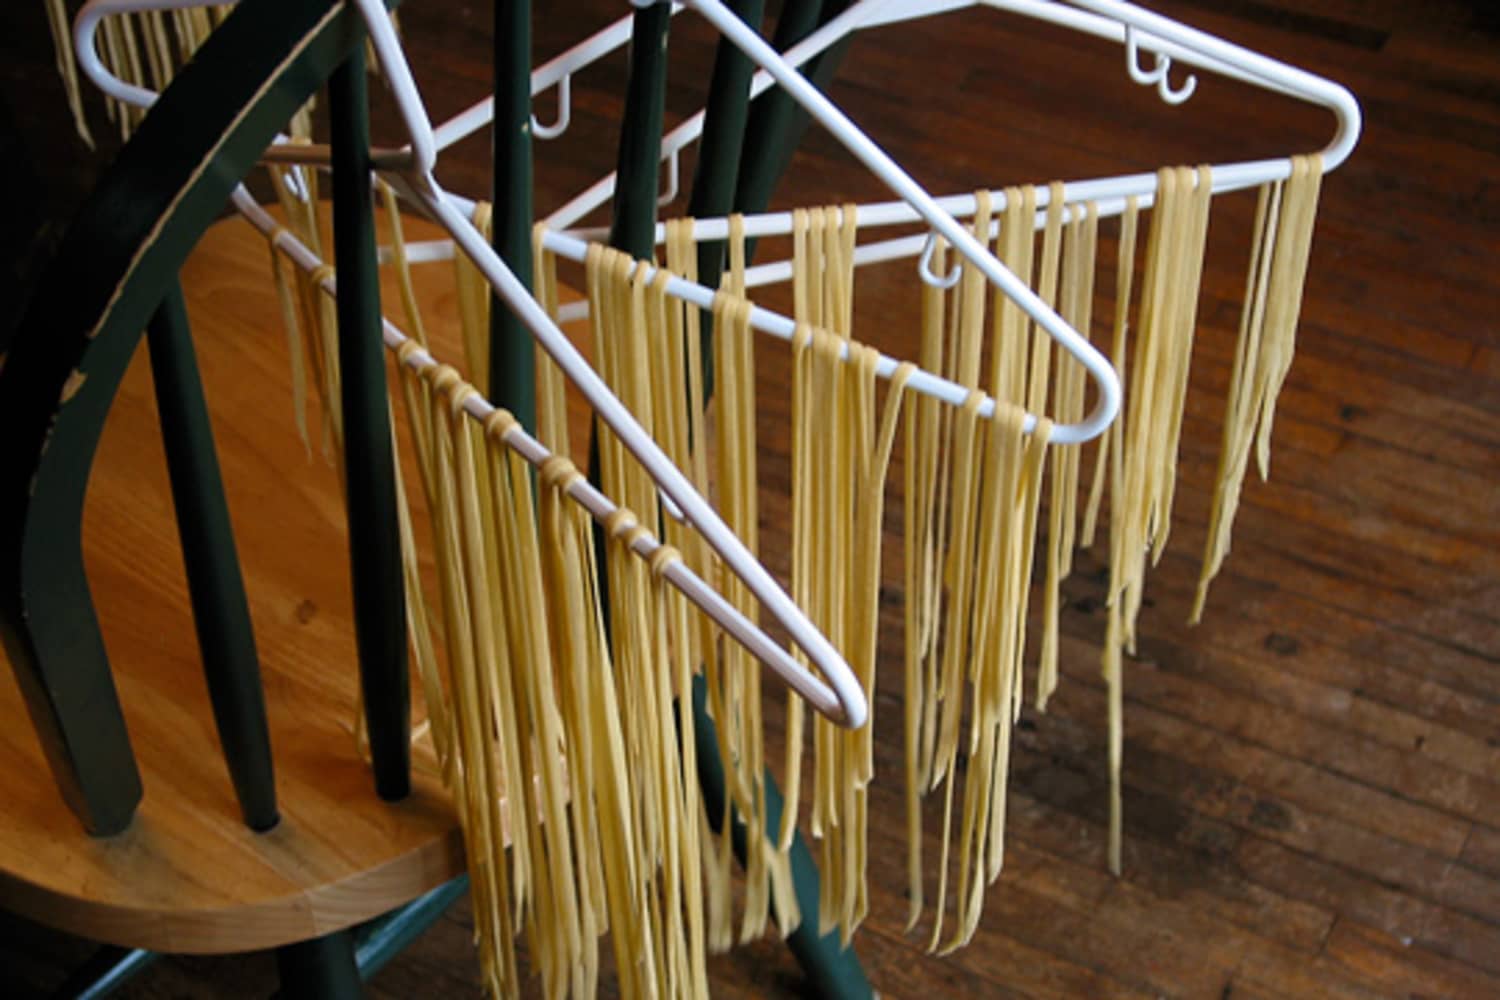 Natural Wood Pasta Drying Rack Stand, Kitchen Noodle Dryer Rack